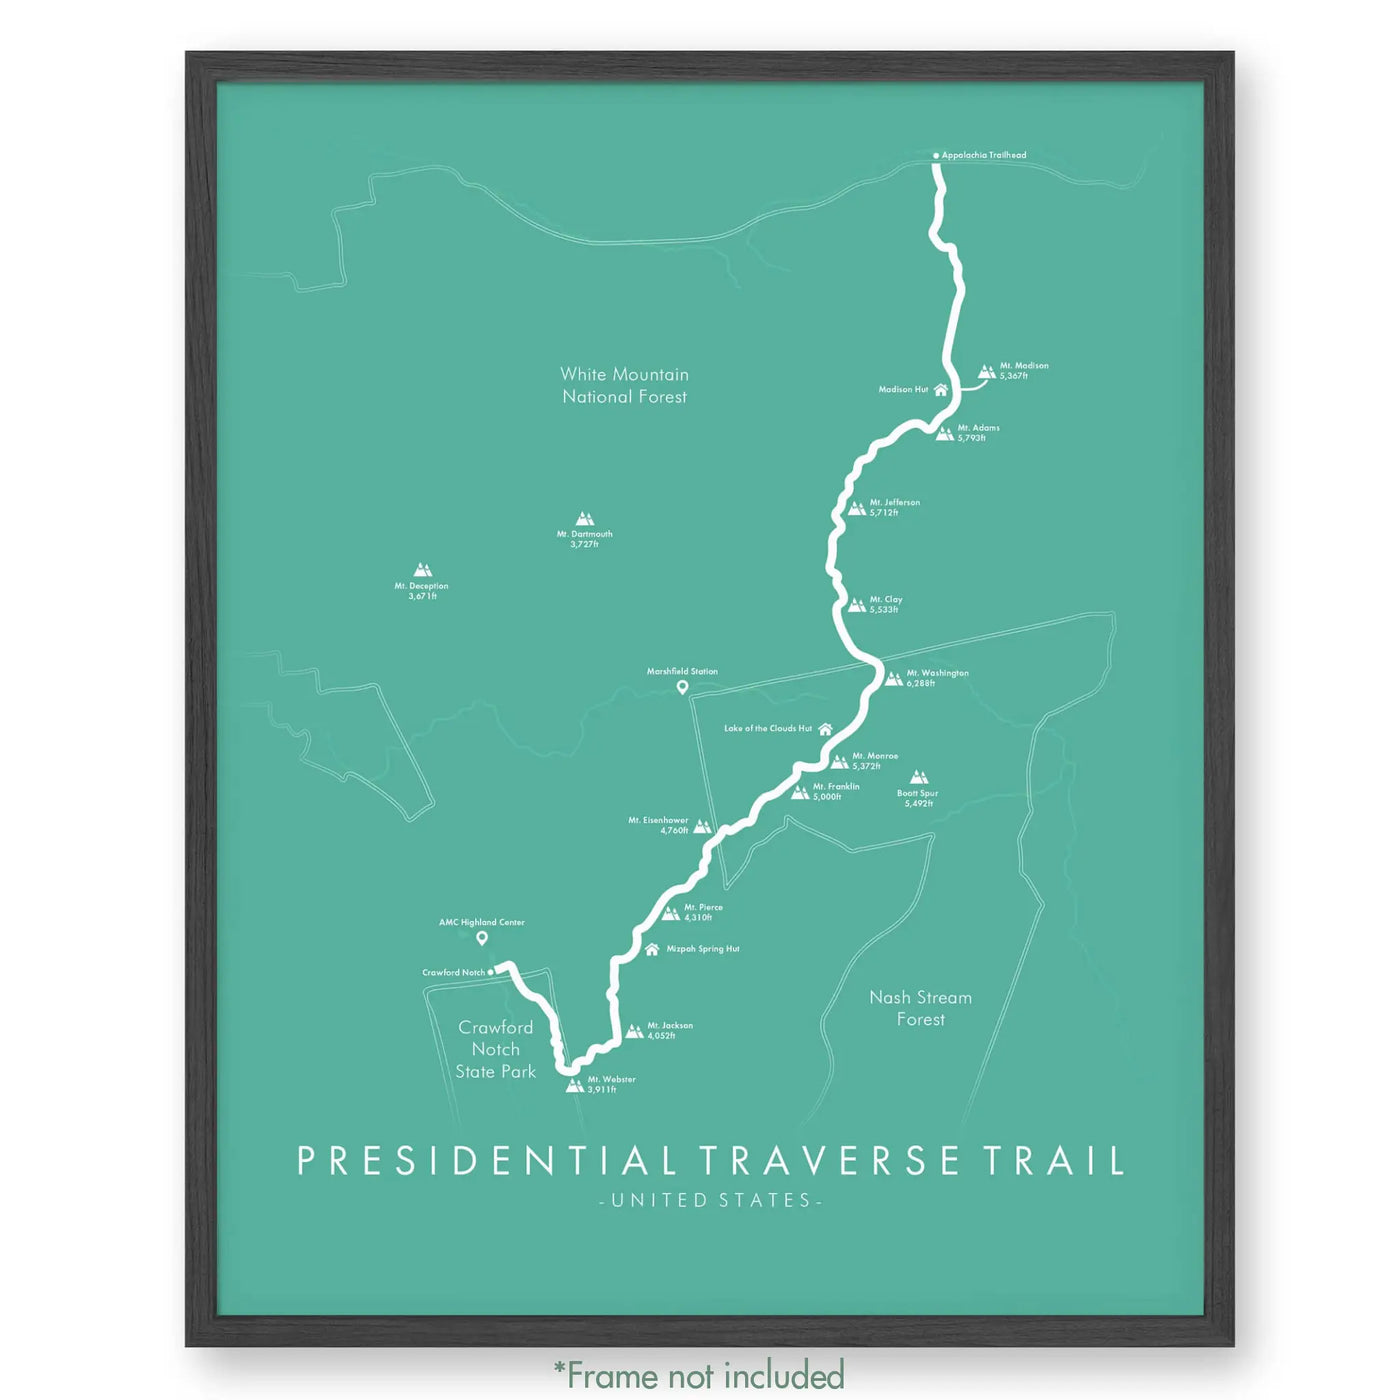 Trail Poster of Presidential Traverse Trail - Teal